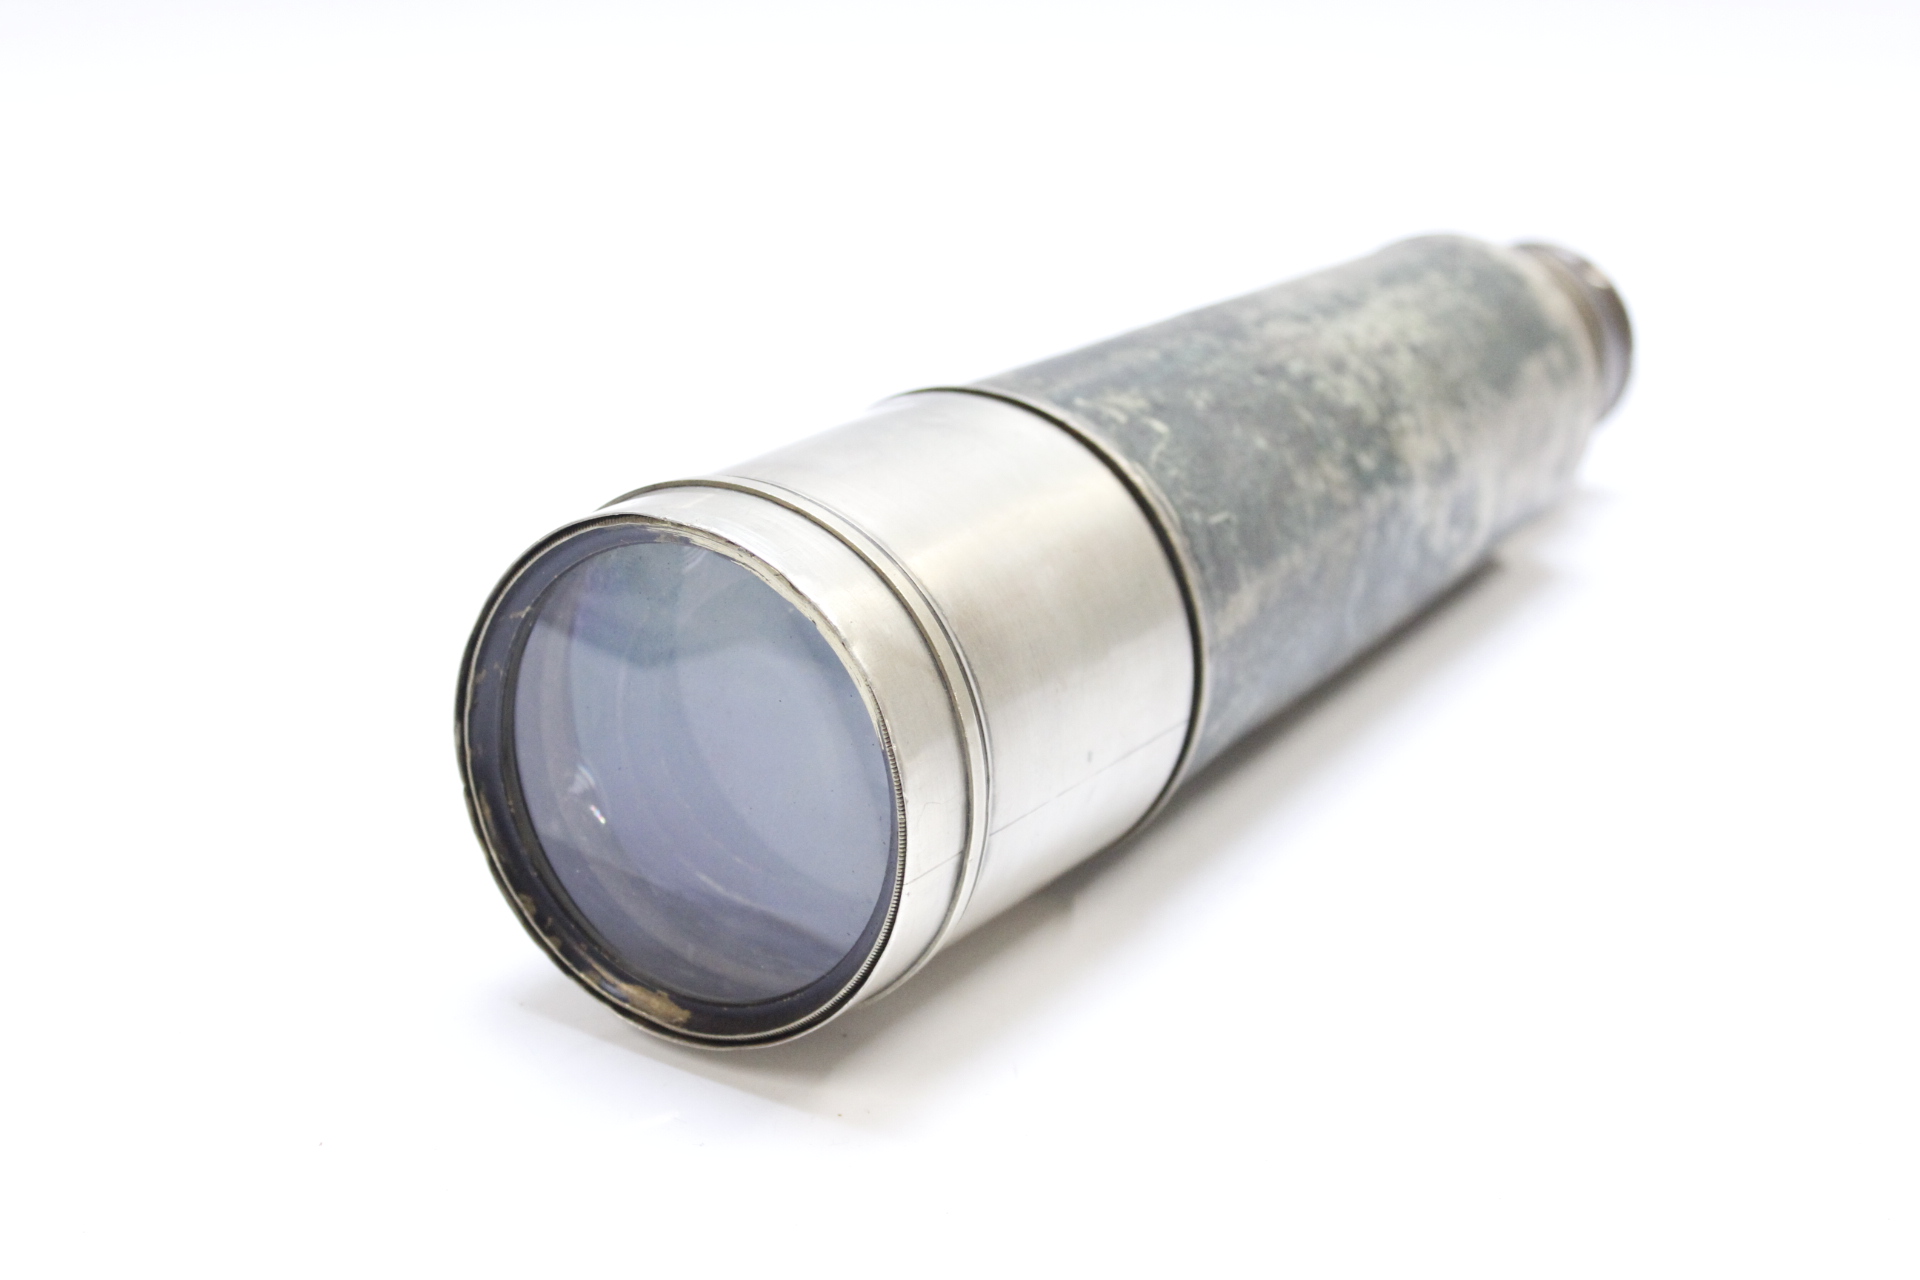 3-draw antique brass telescope ''The Viceroy'' marked J H Steward Ltd 406 & 457 The Strand, London - Image 2 of 2